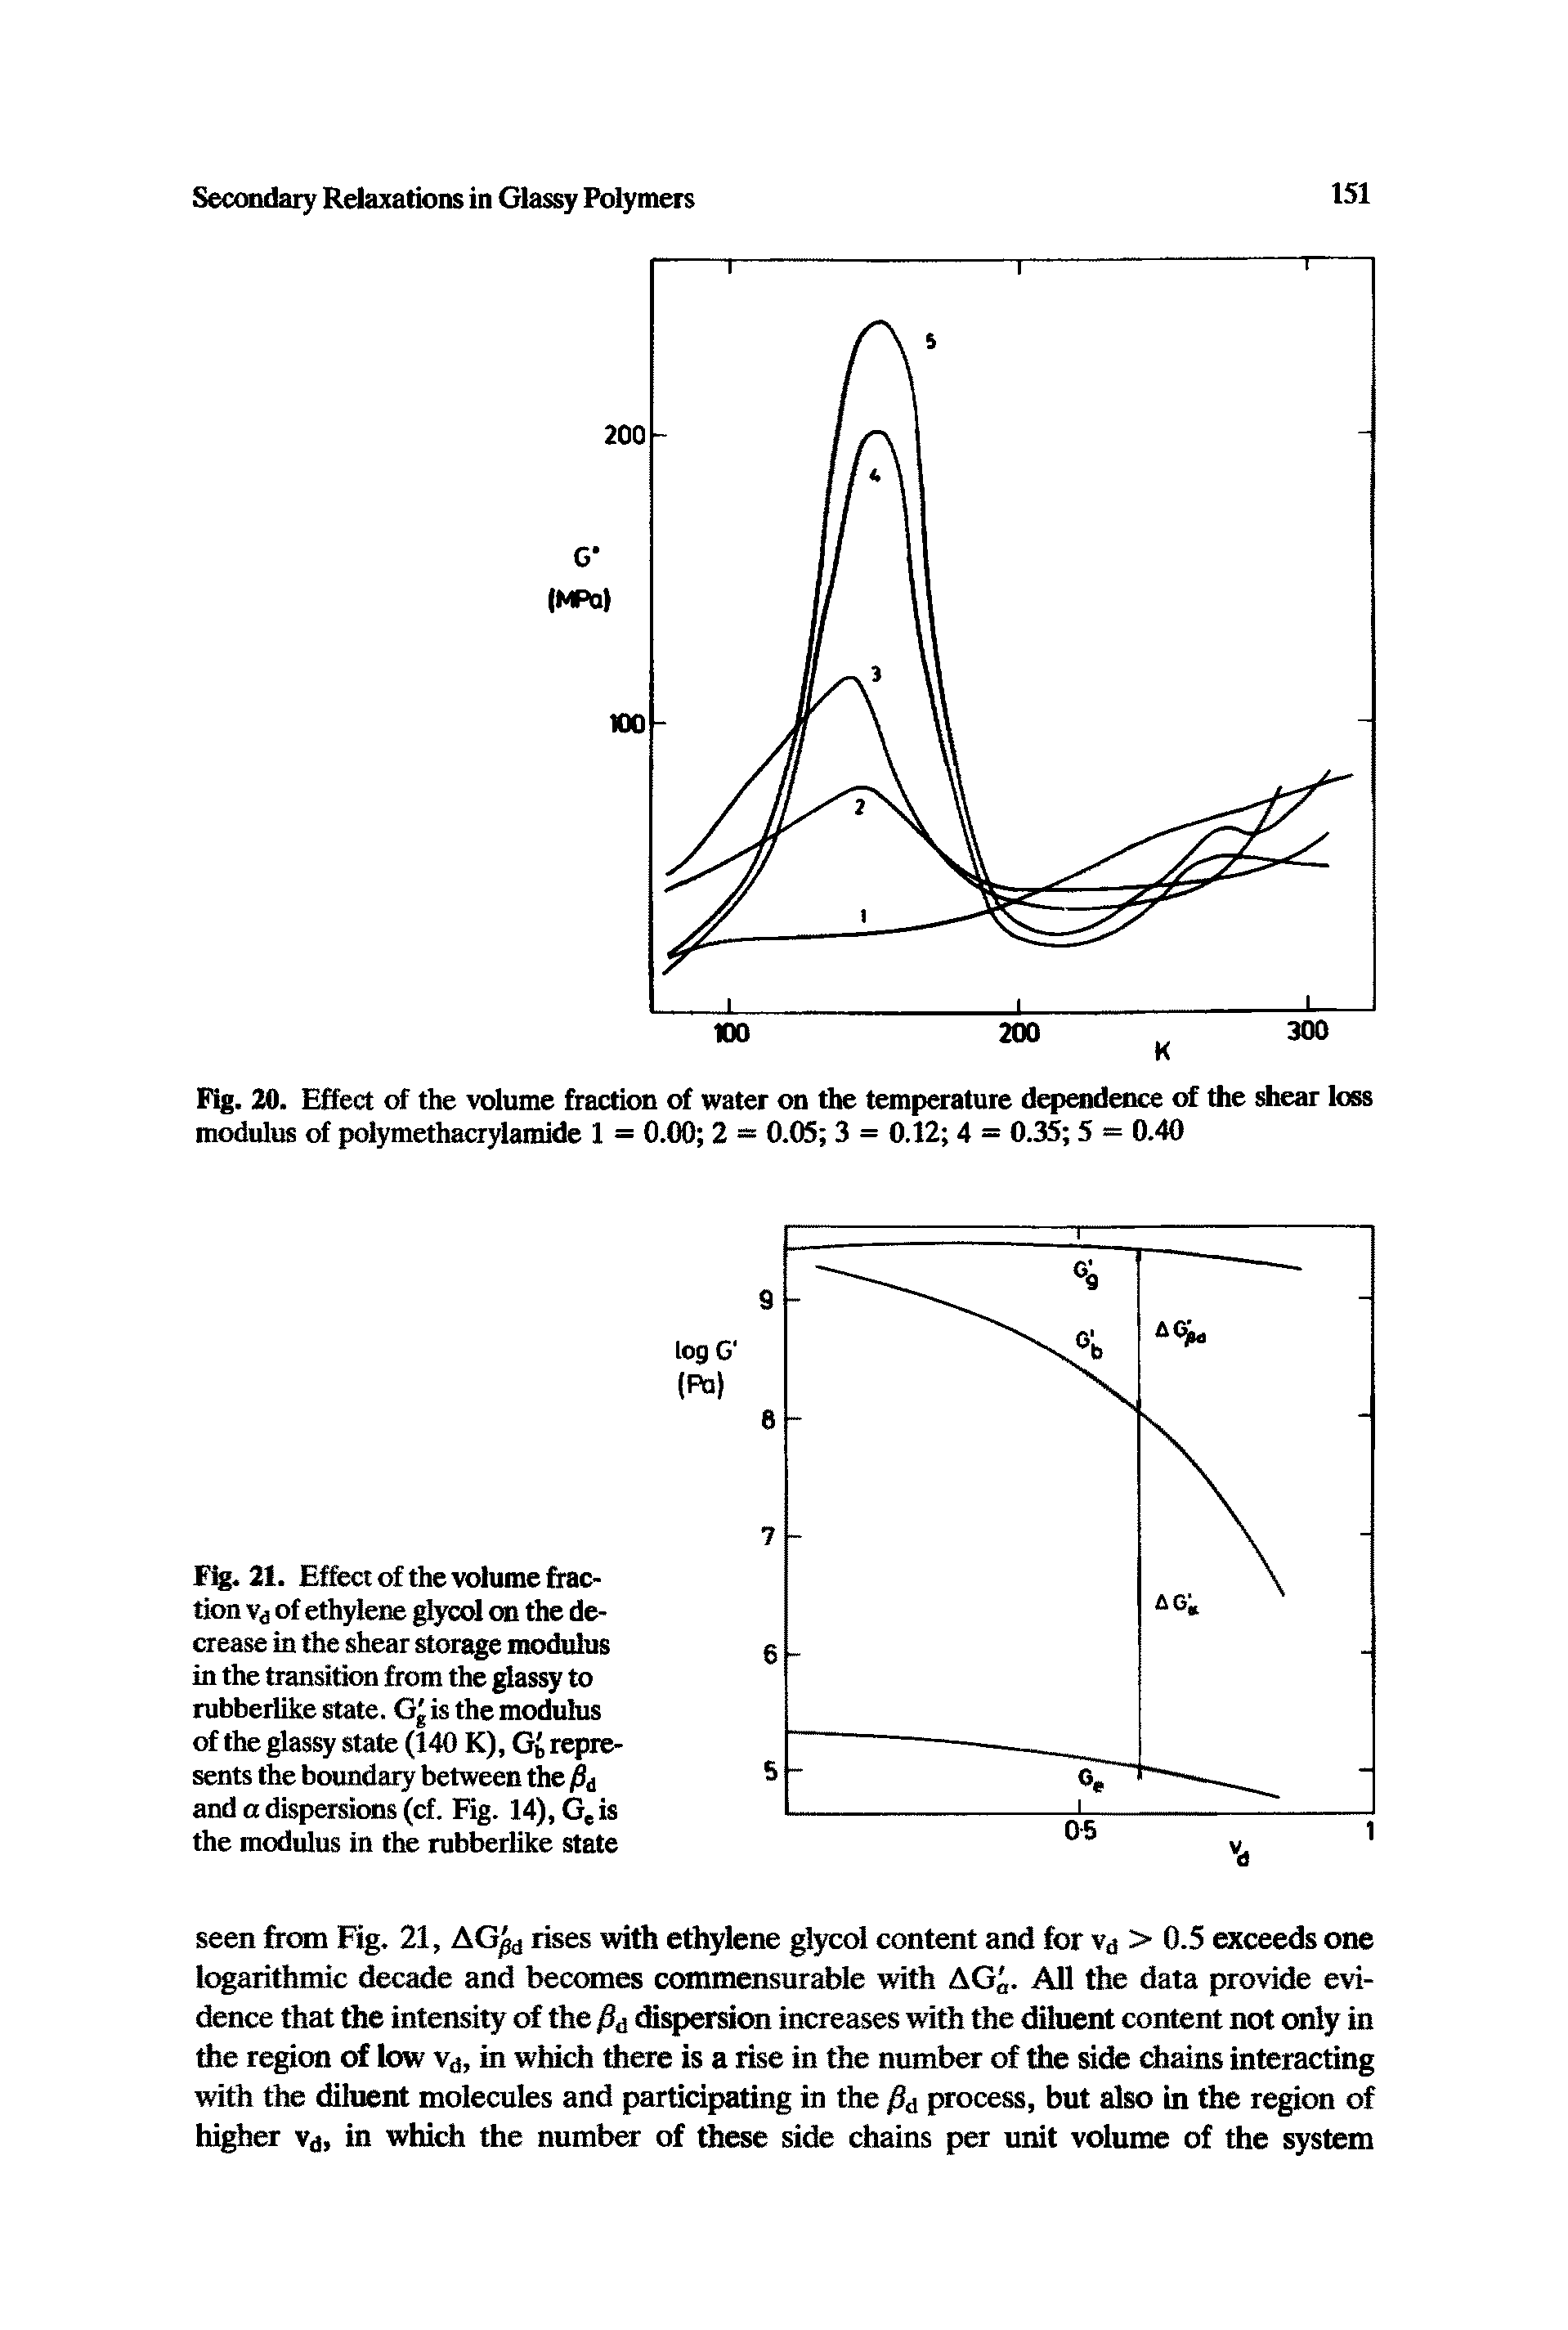 Fig. 21. Effect of the volume fraction vd of ethylene glycol on the decrease in the shear storage modulus in the transition from the glassy to rubberlike state. Gg is the modulus of the glassy state (140 K), G represents the boundary between the /8d and a dispersions (cf. Fig. 14), Ge is the modulus in the rubberlike state...